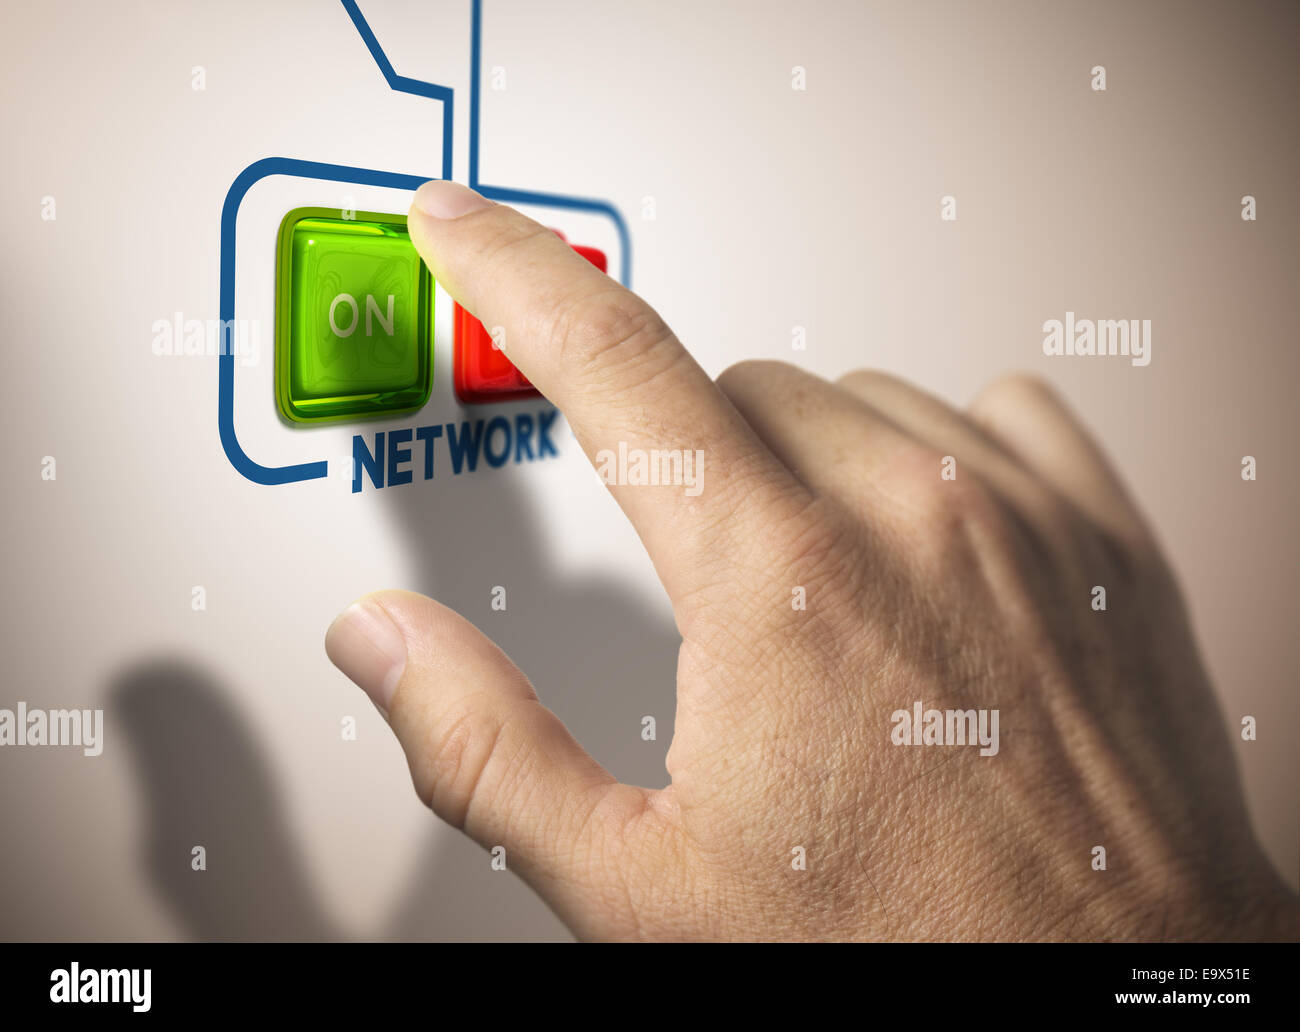 One finger pressing on button. Concept of networking or network activation Stock Photo